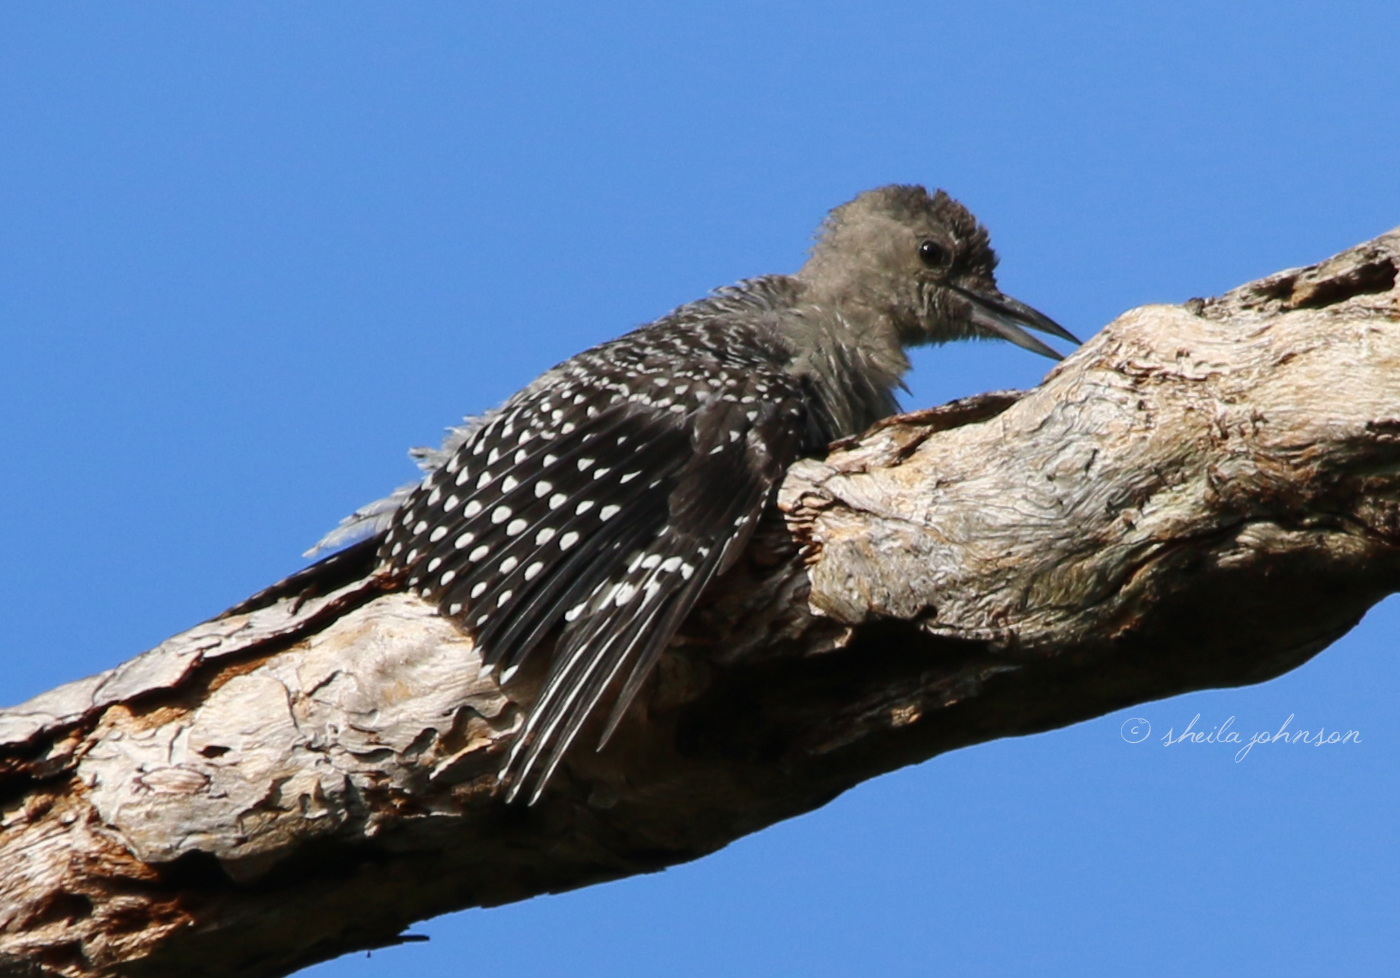 'There's A Crazy Lady With A Camera Out Here!' Yup. Woodpecker Stalking Is A Regular And Favorite Pastime For Me, And This Juvenile Red-Bellied Woodpecker Tells Mom On Me.